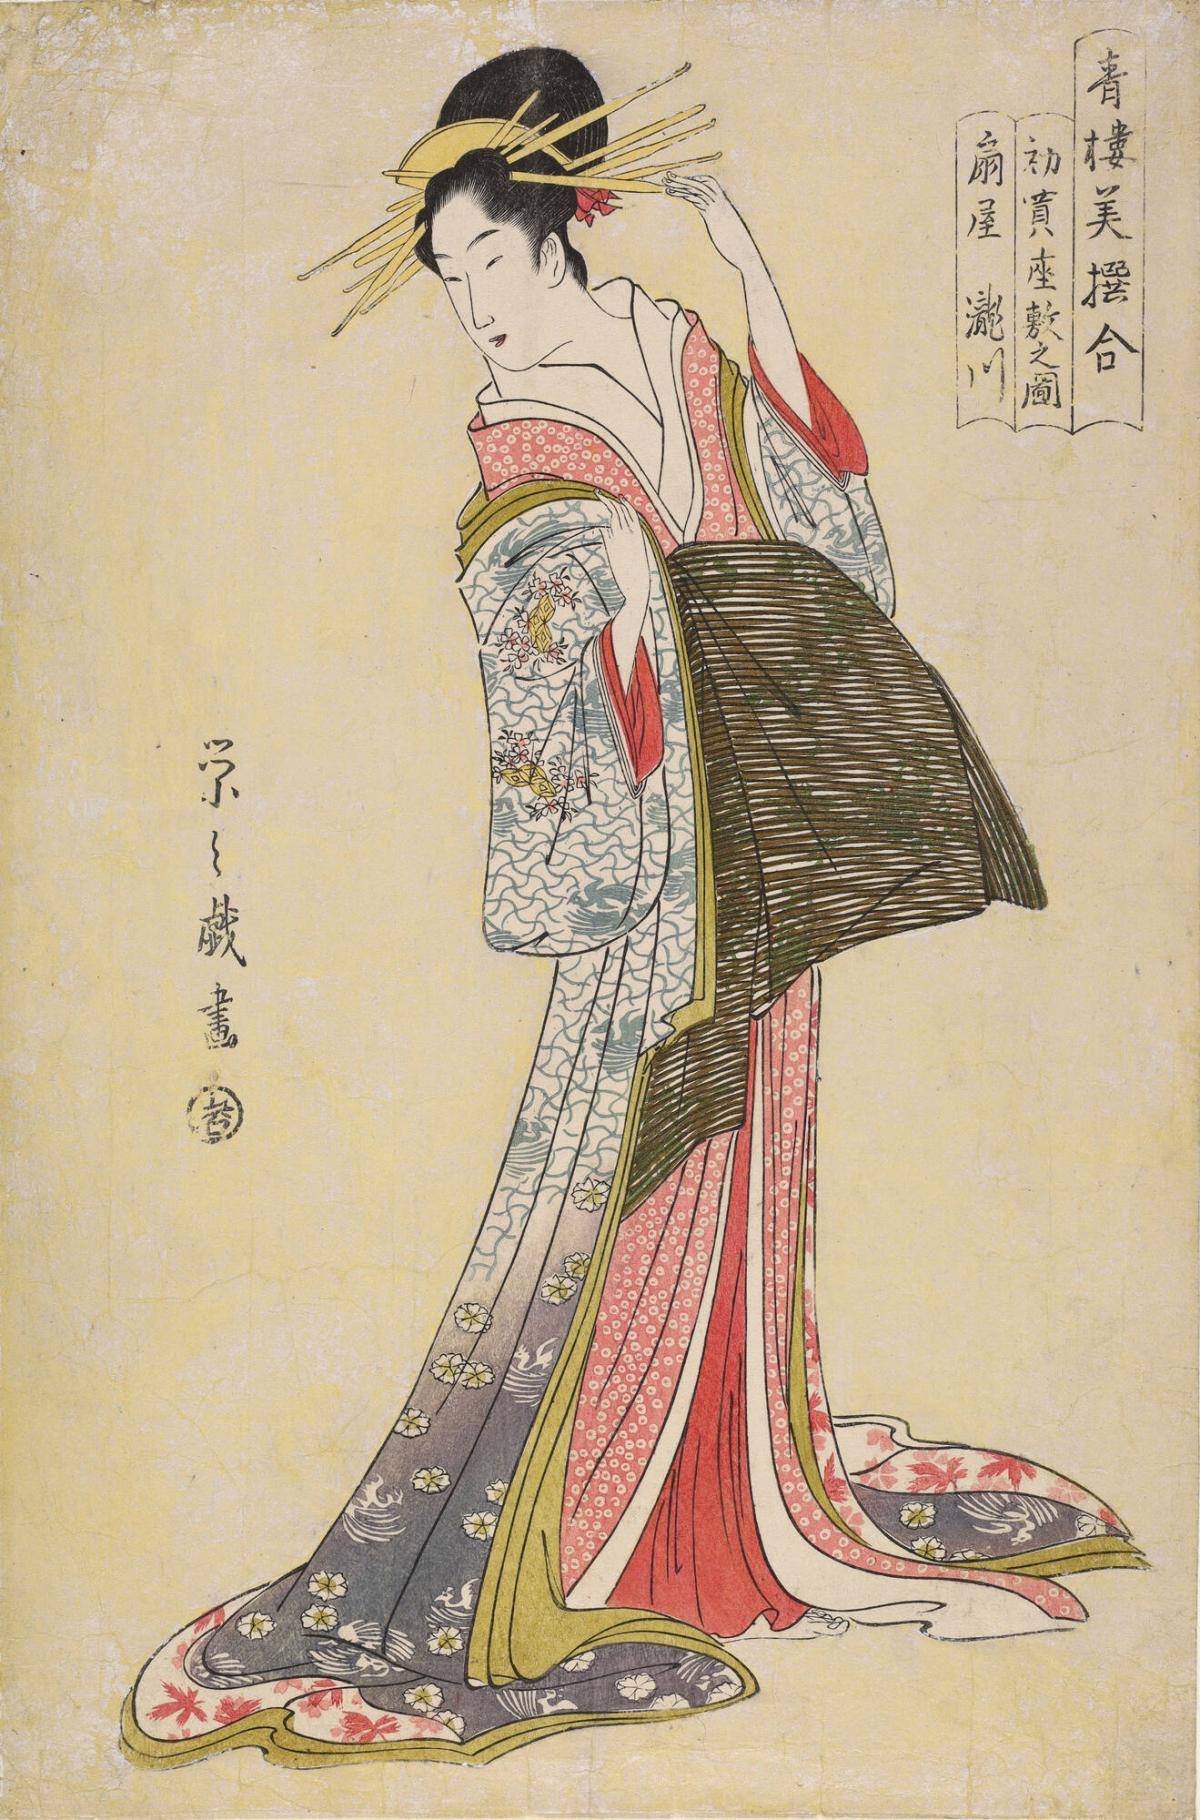 The Courtesan Takigawa of the Ogiya House Offering herself Publically for the First Time in the Year, from the series Beauties of the Green Houses